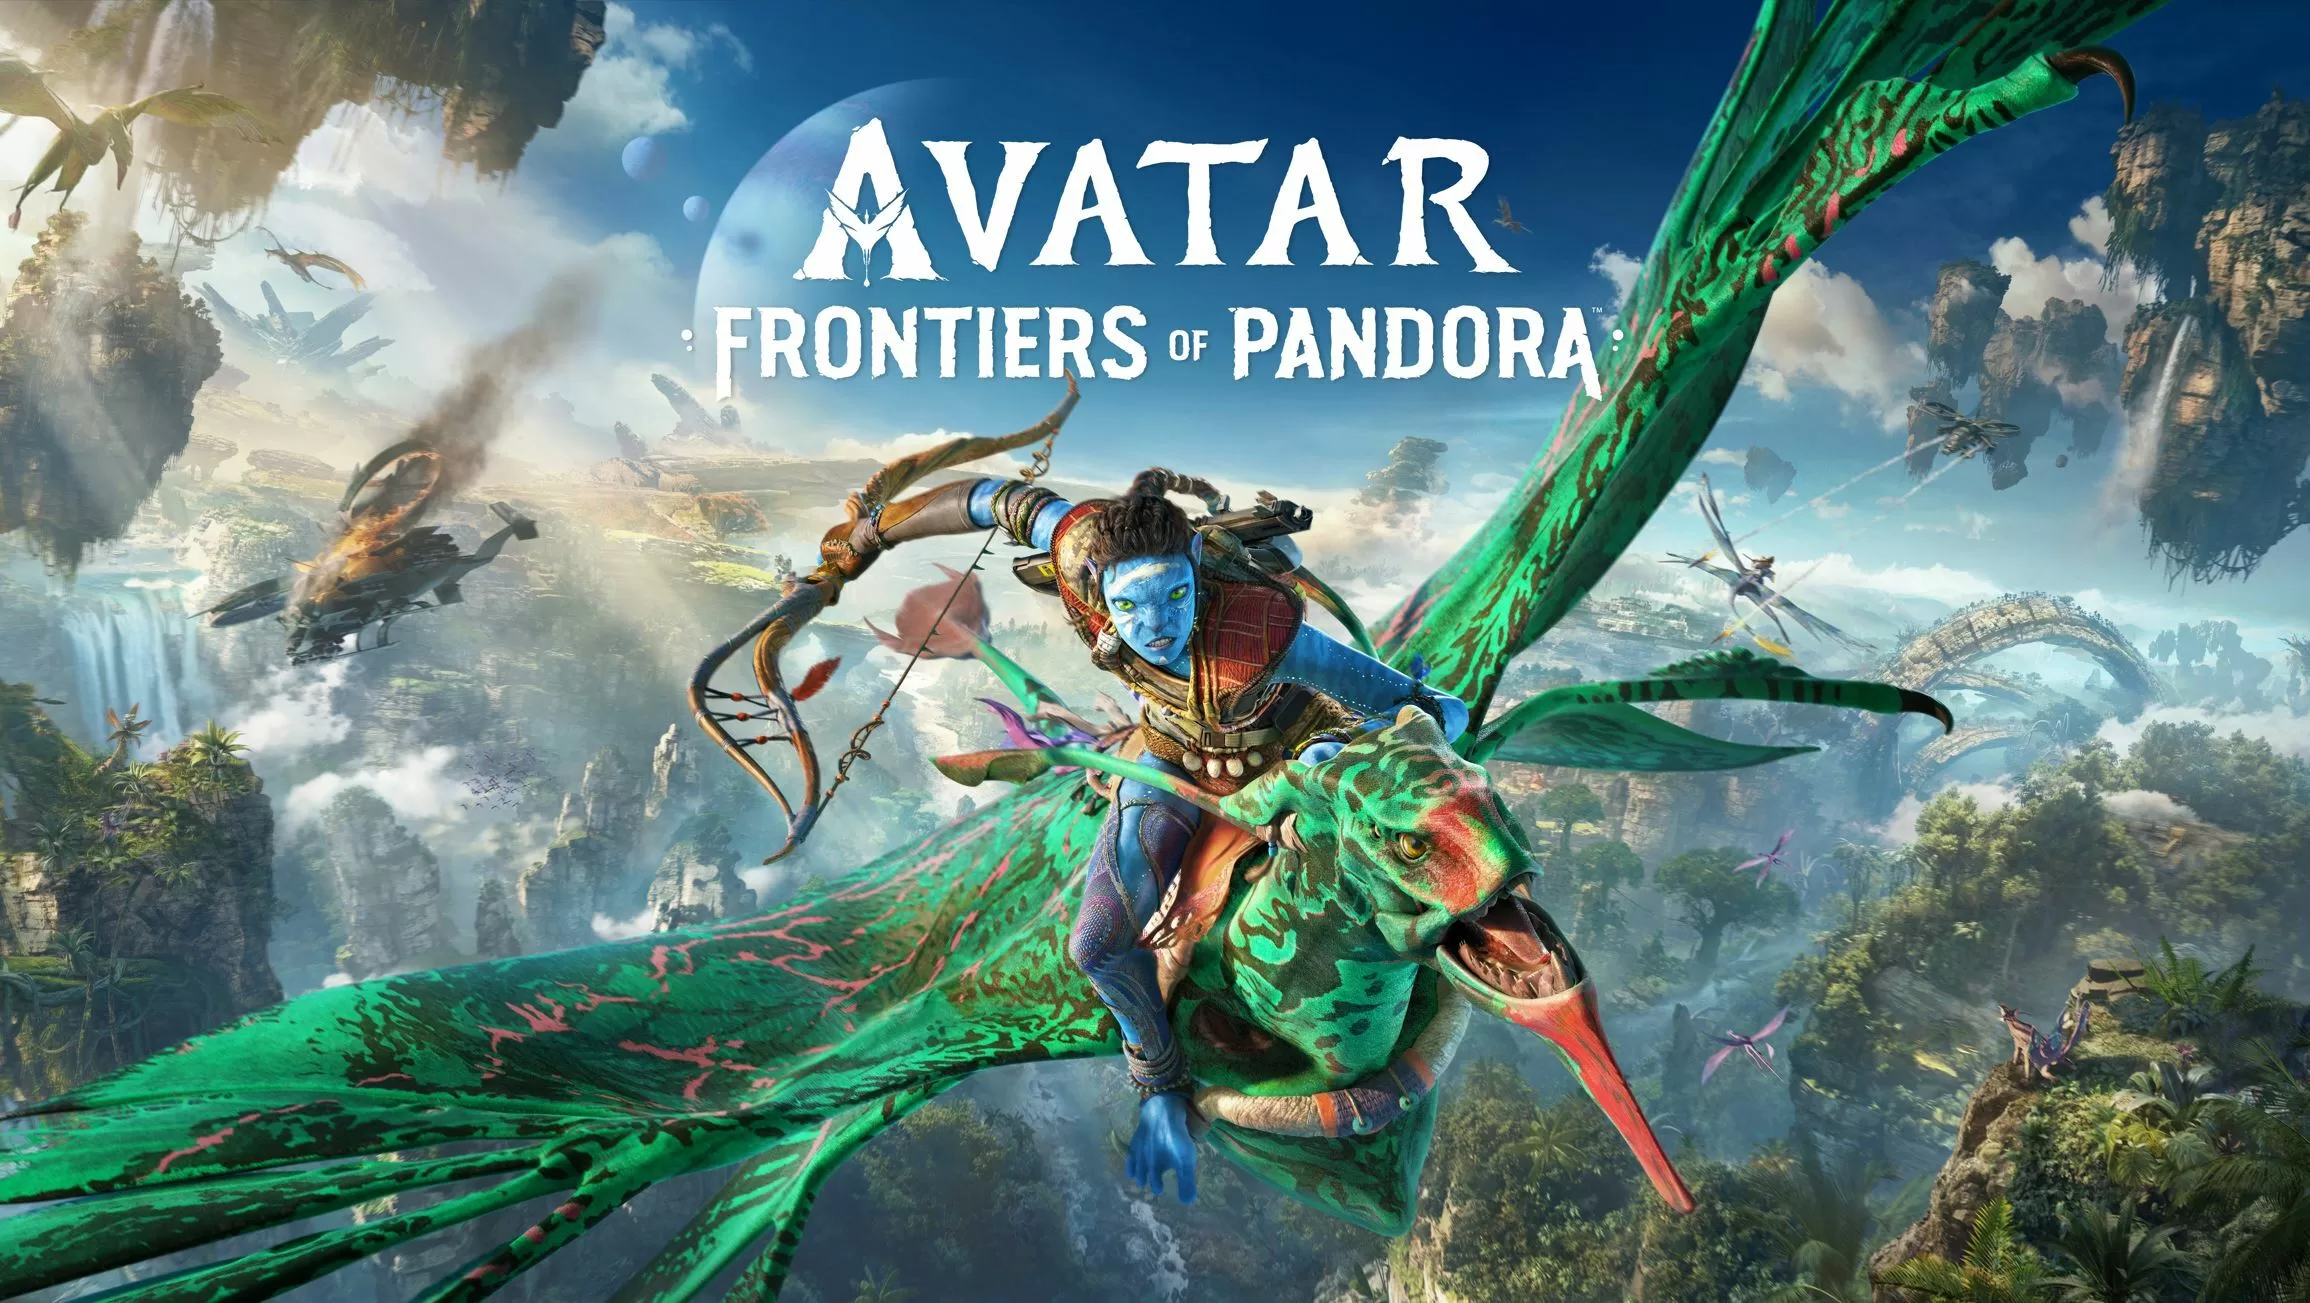 Avatar: Frontiers of Pandora – Exploring the Mysteries of Pandora in a New Avatar Game